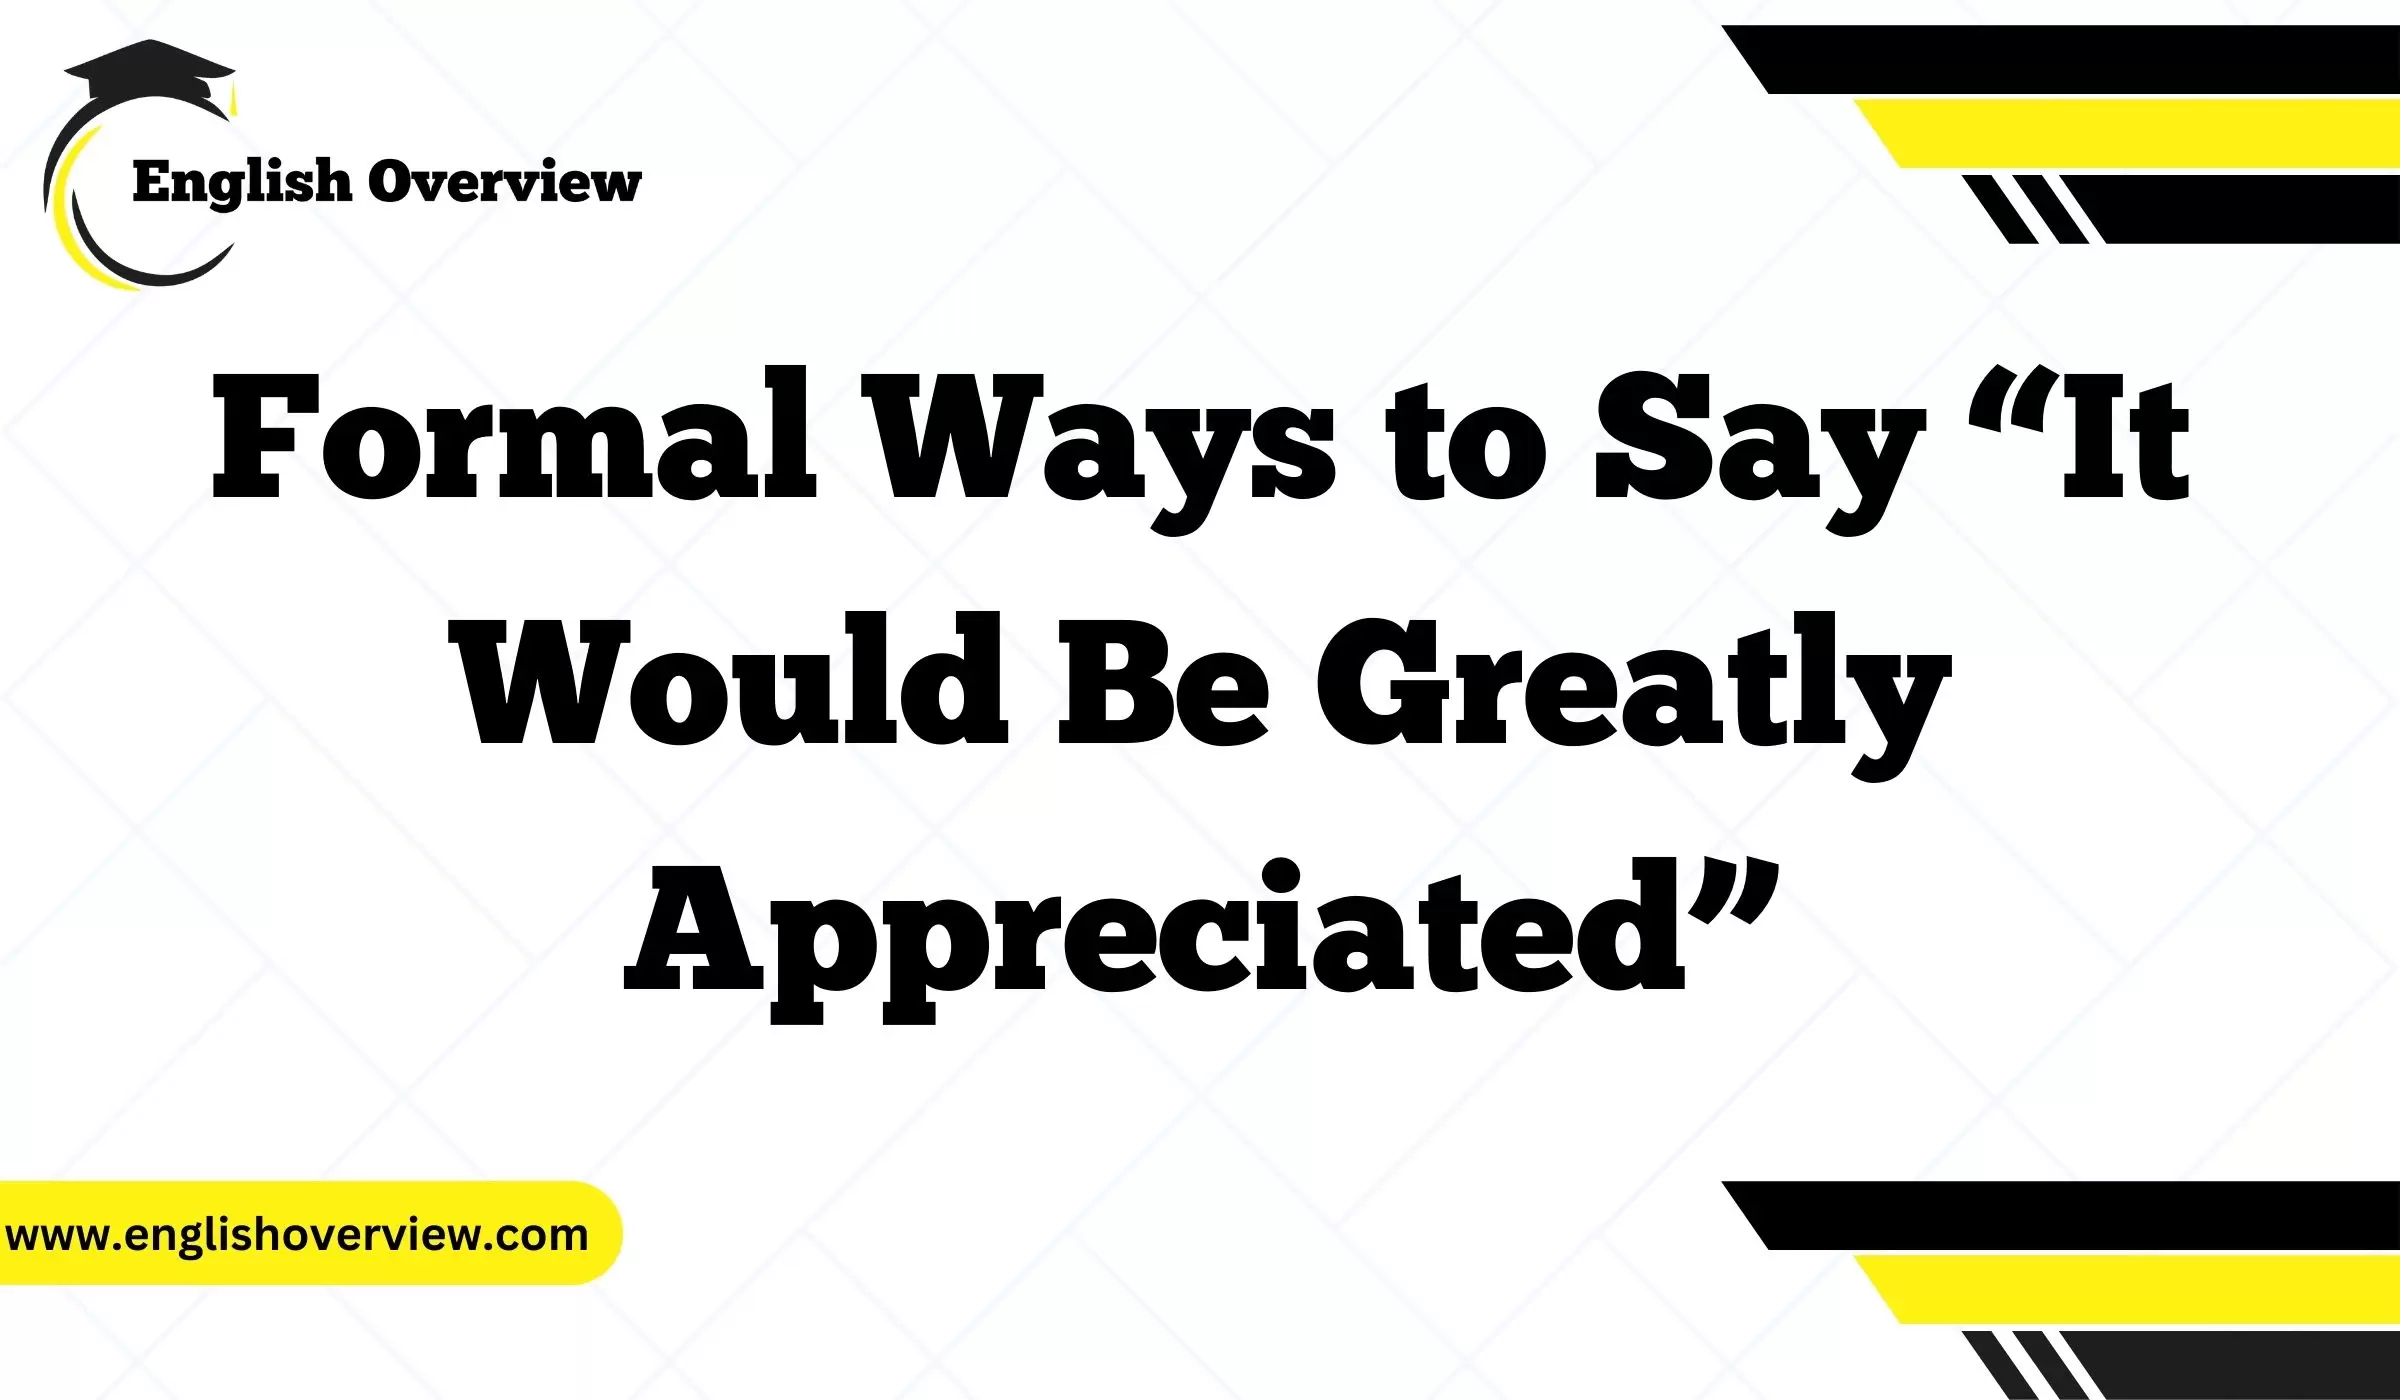 Formal Ways to Say “It Would Be Greatly Appreciated”